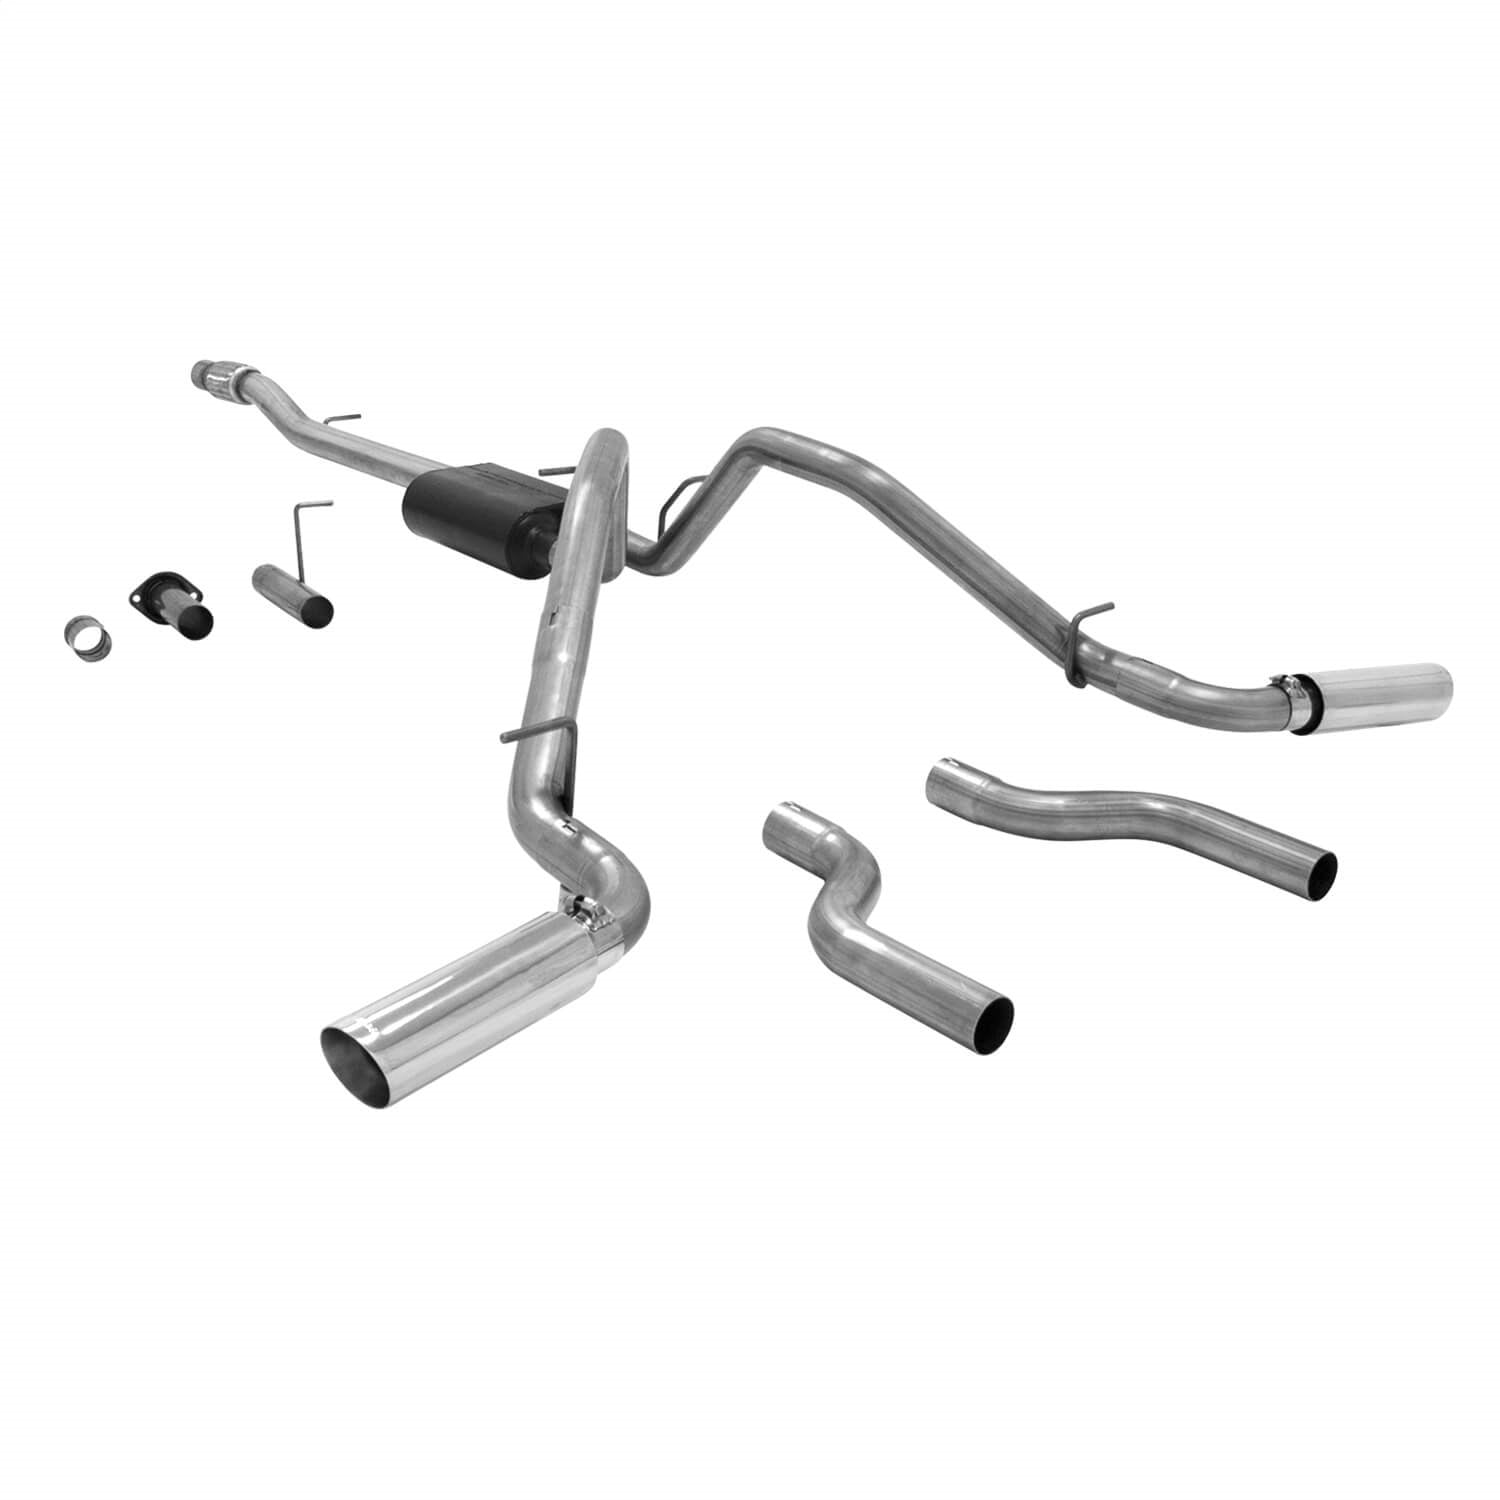 Flowmaster 817680 American Thunder Cat Back Exhaust System